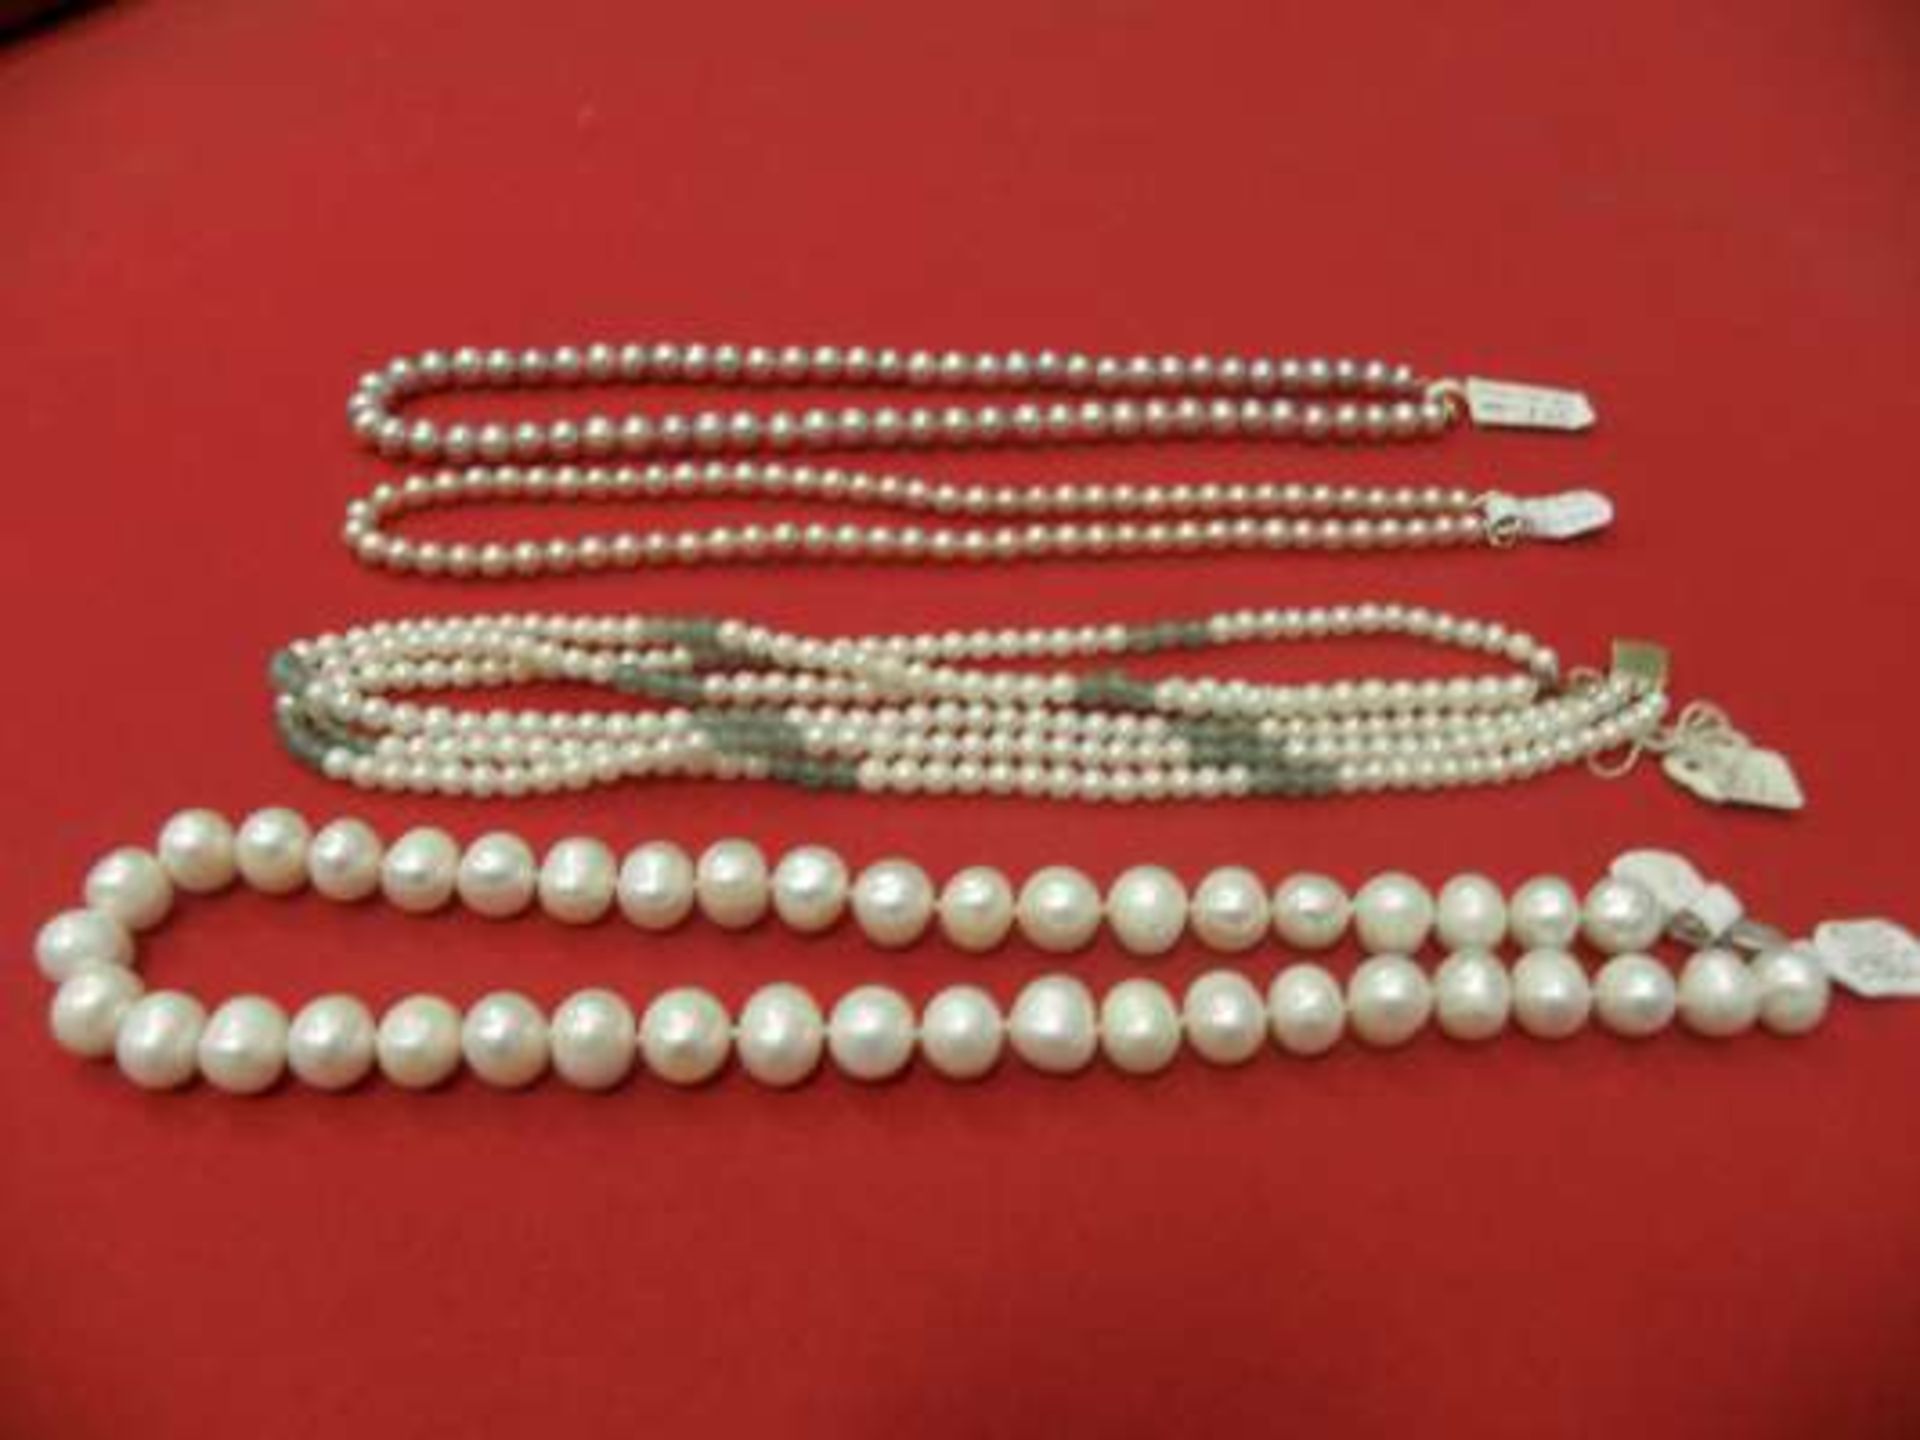 1 X 18" WHITE FRESH WATER PEARL NECKLACE RRP £130, 3 X 16" FRESH WATER PEARL NECKLACES RRP £168